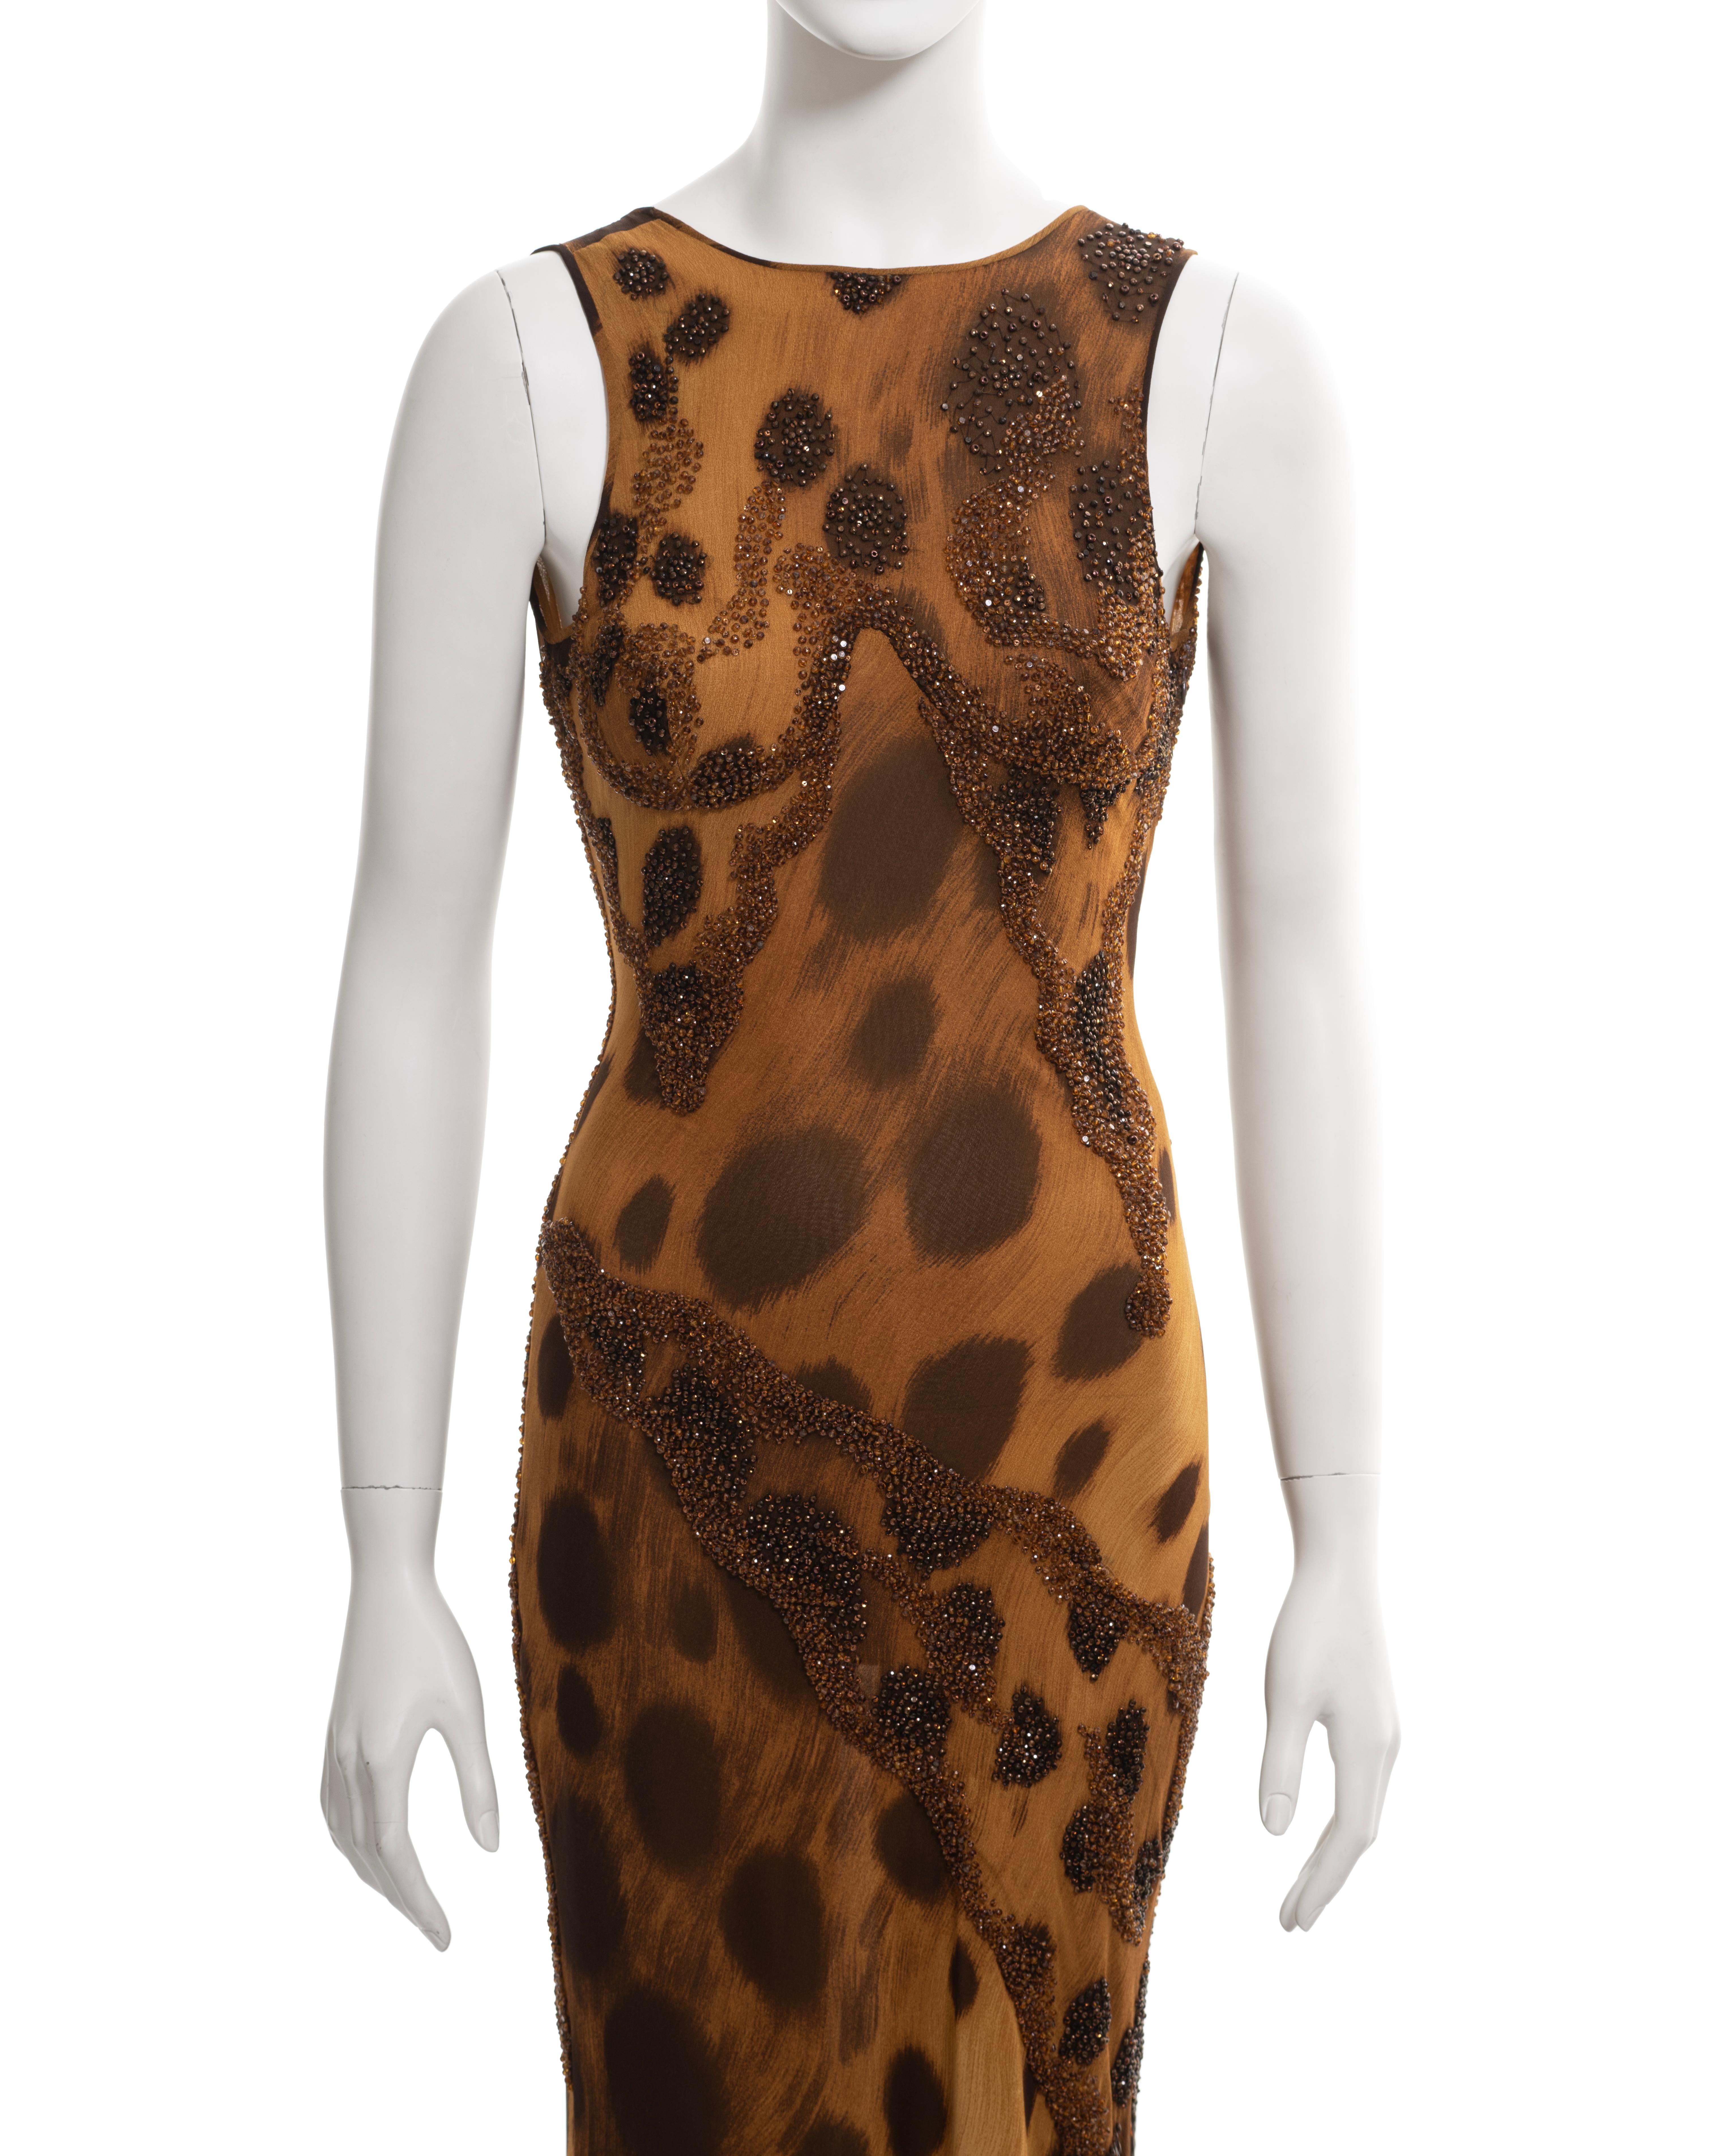 Atelier Versace Couture silk evening dress with beaded cheetah print, fw 1996 In Excellent Condition For Sale In London, GB